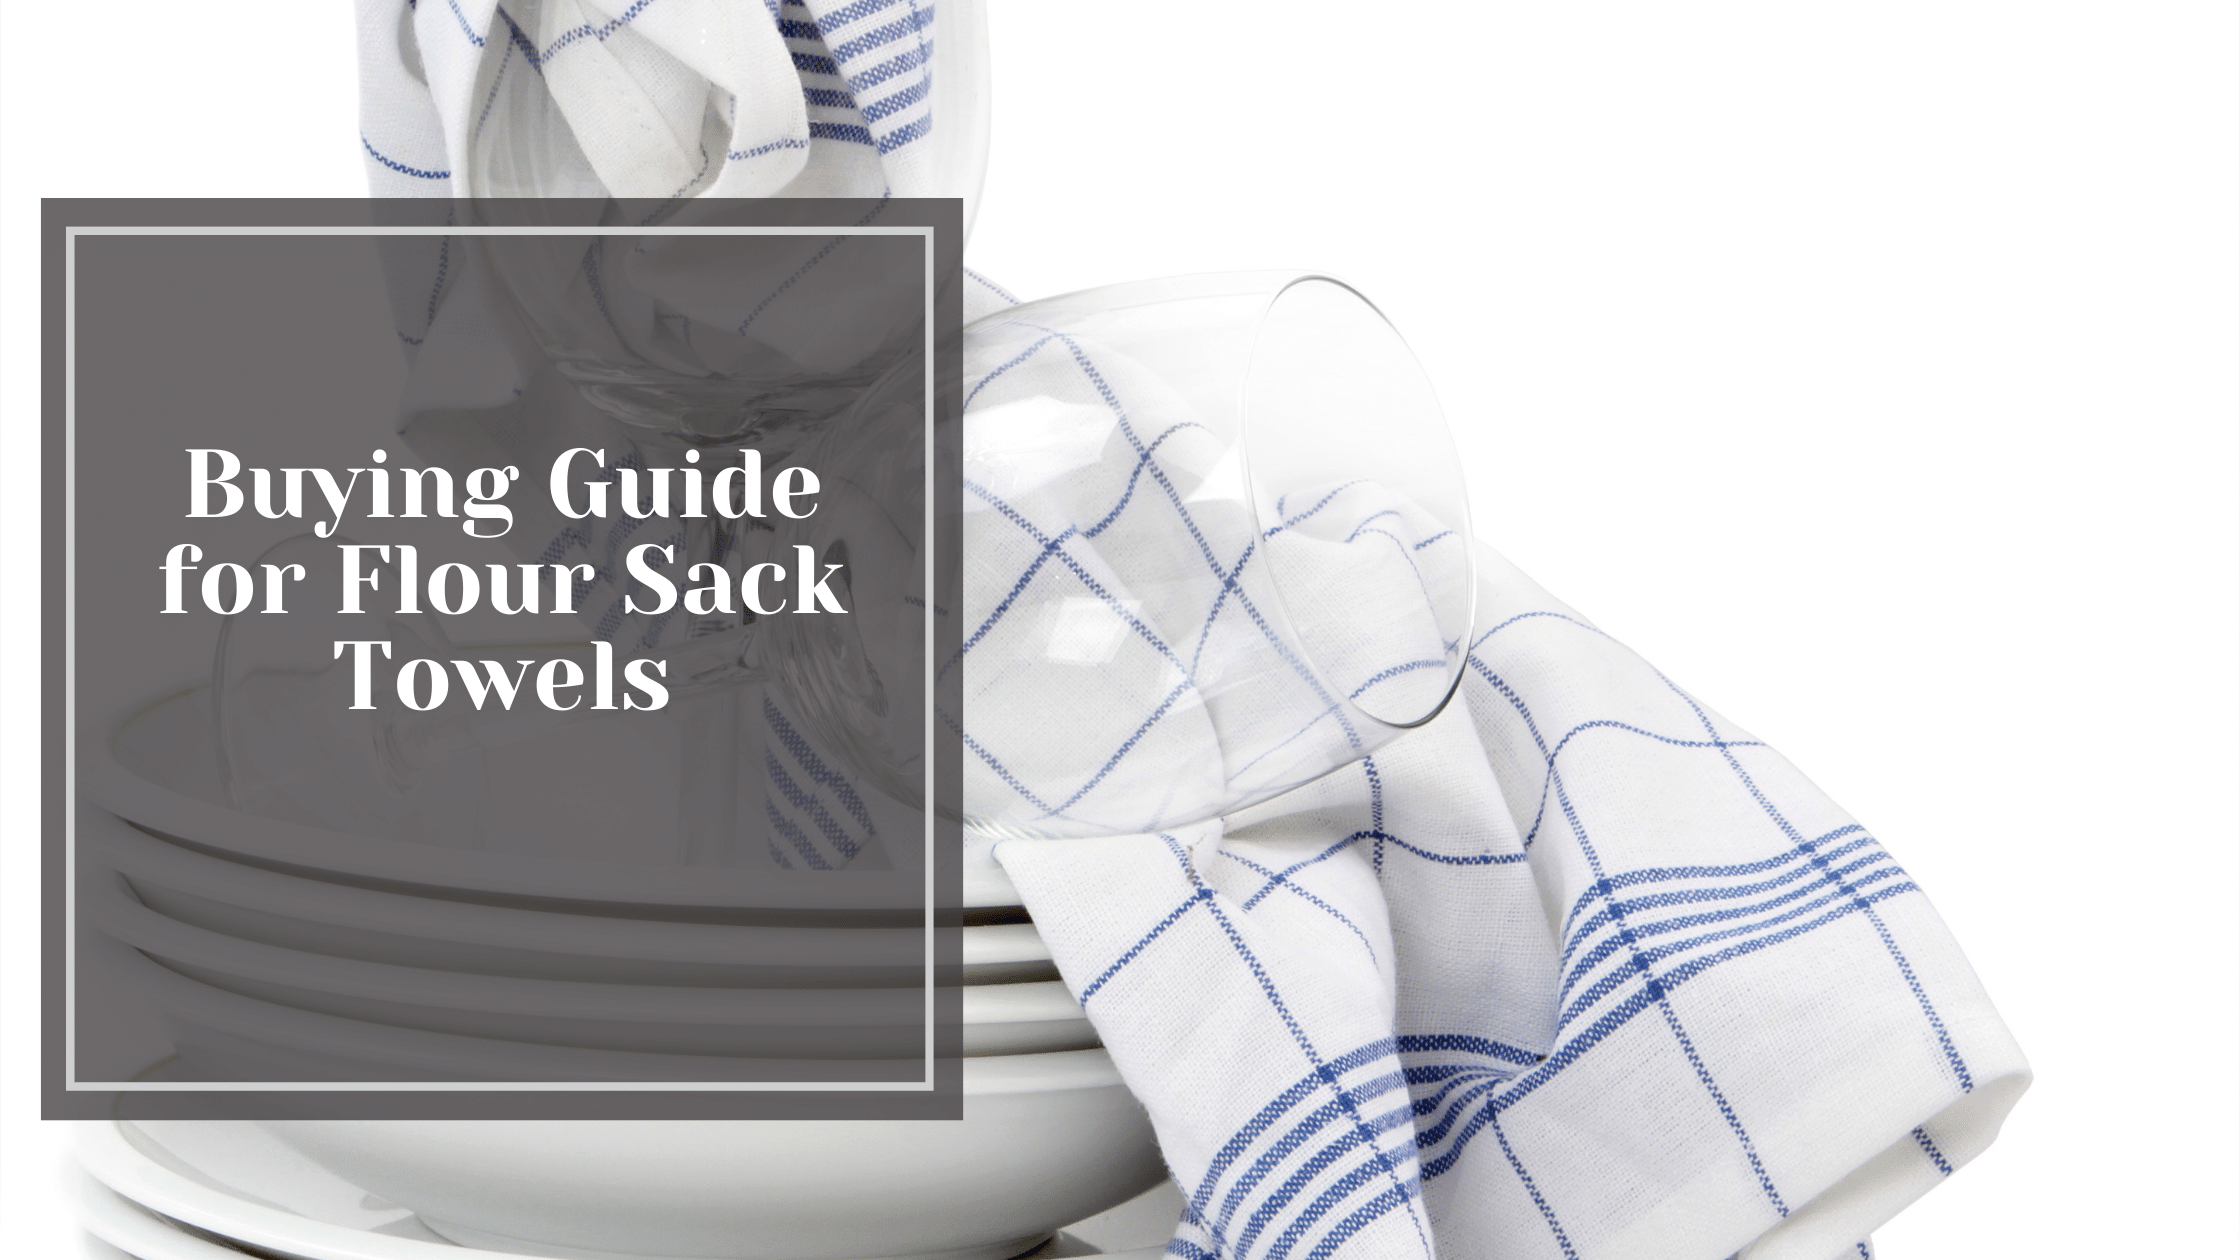 https://www.sacktowels.com/wp-content/uploads/2023/05/Buying-Guide-for-Flour-Sack-Towels-.png